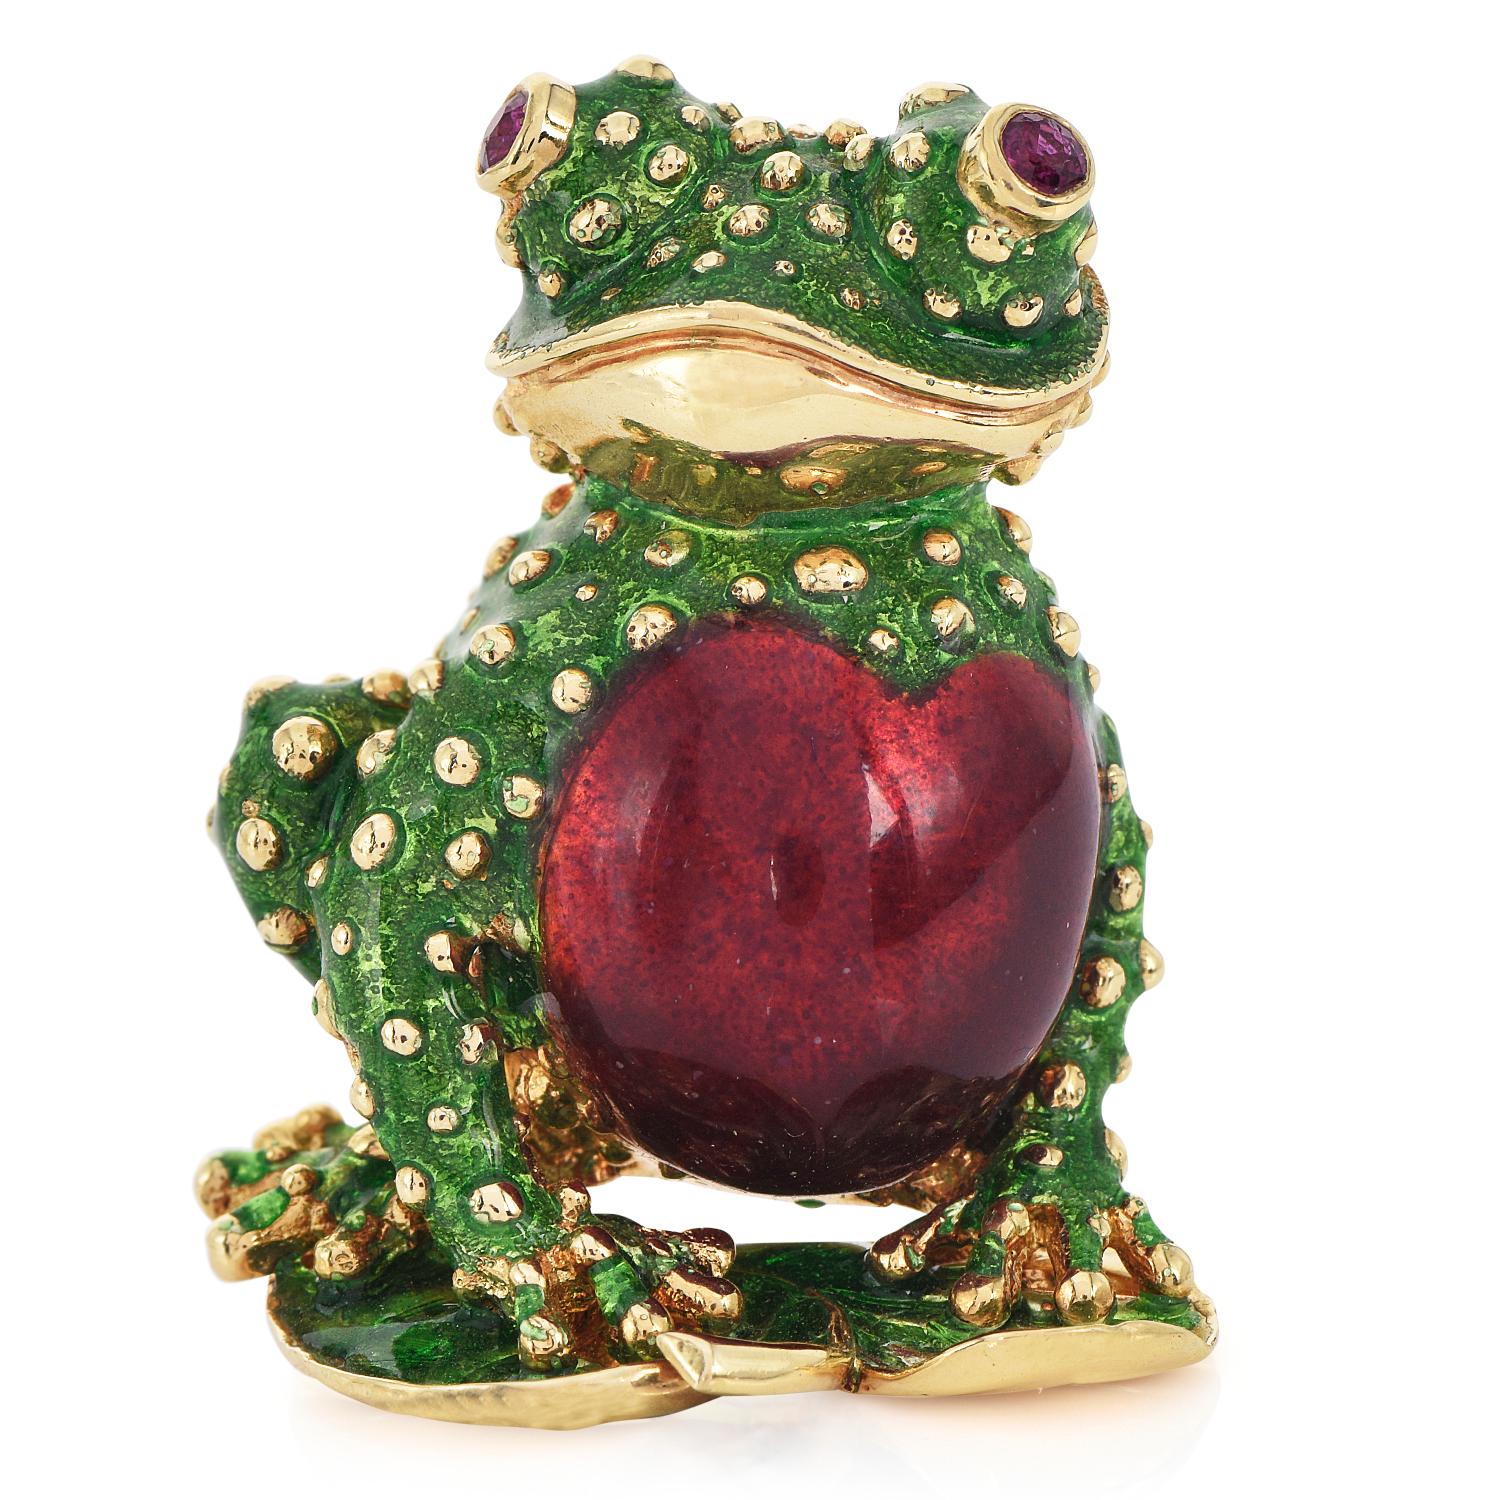 This Brooch is an exquisite representation of a 